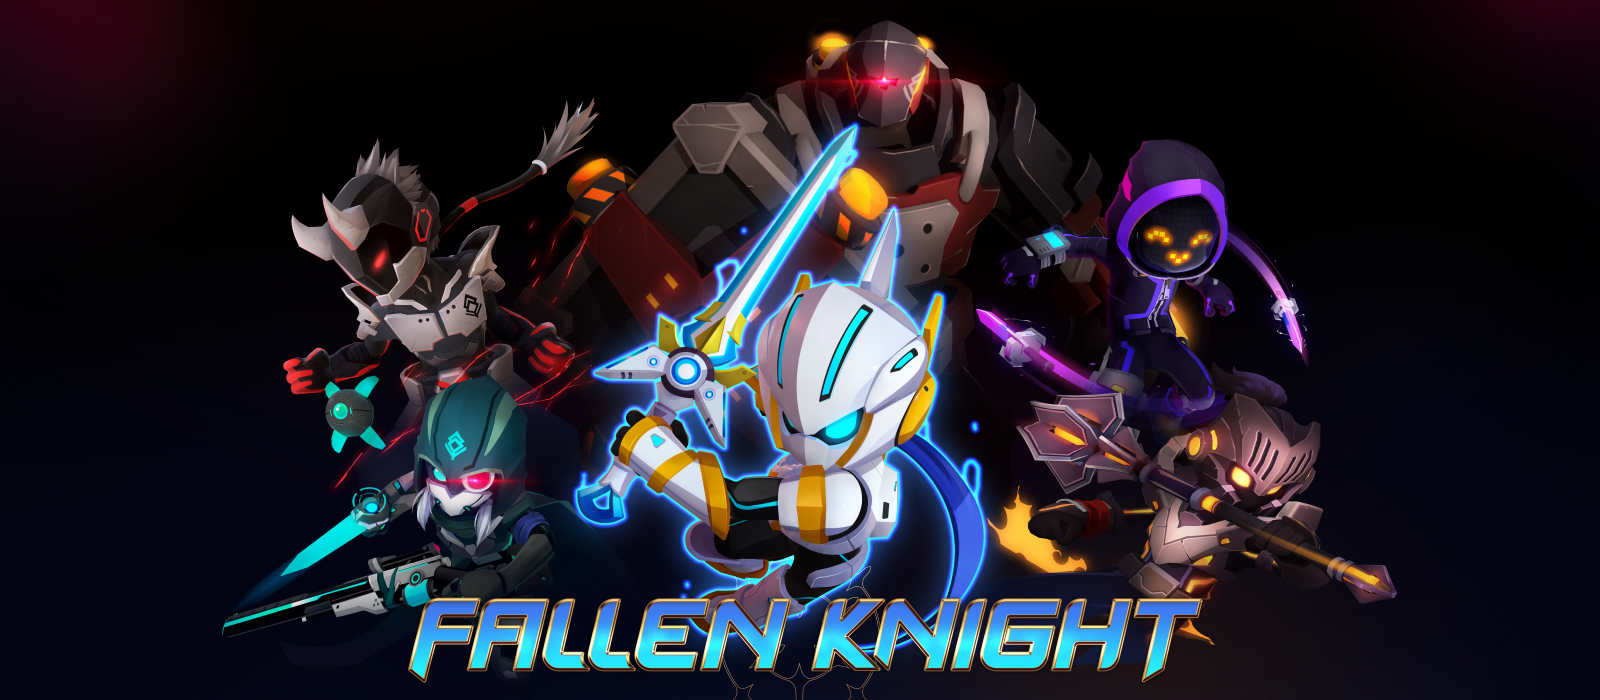 Apple Knight for Nintendo Switch - Nintendo Official Site